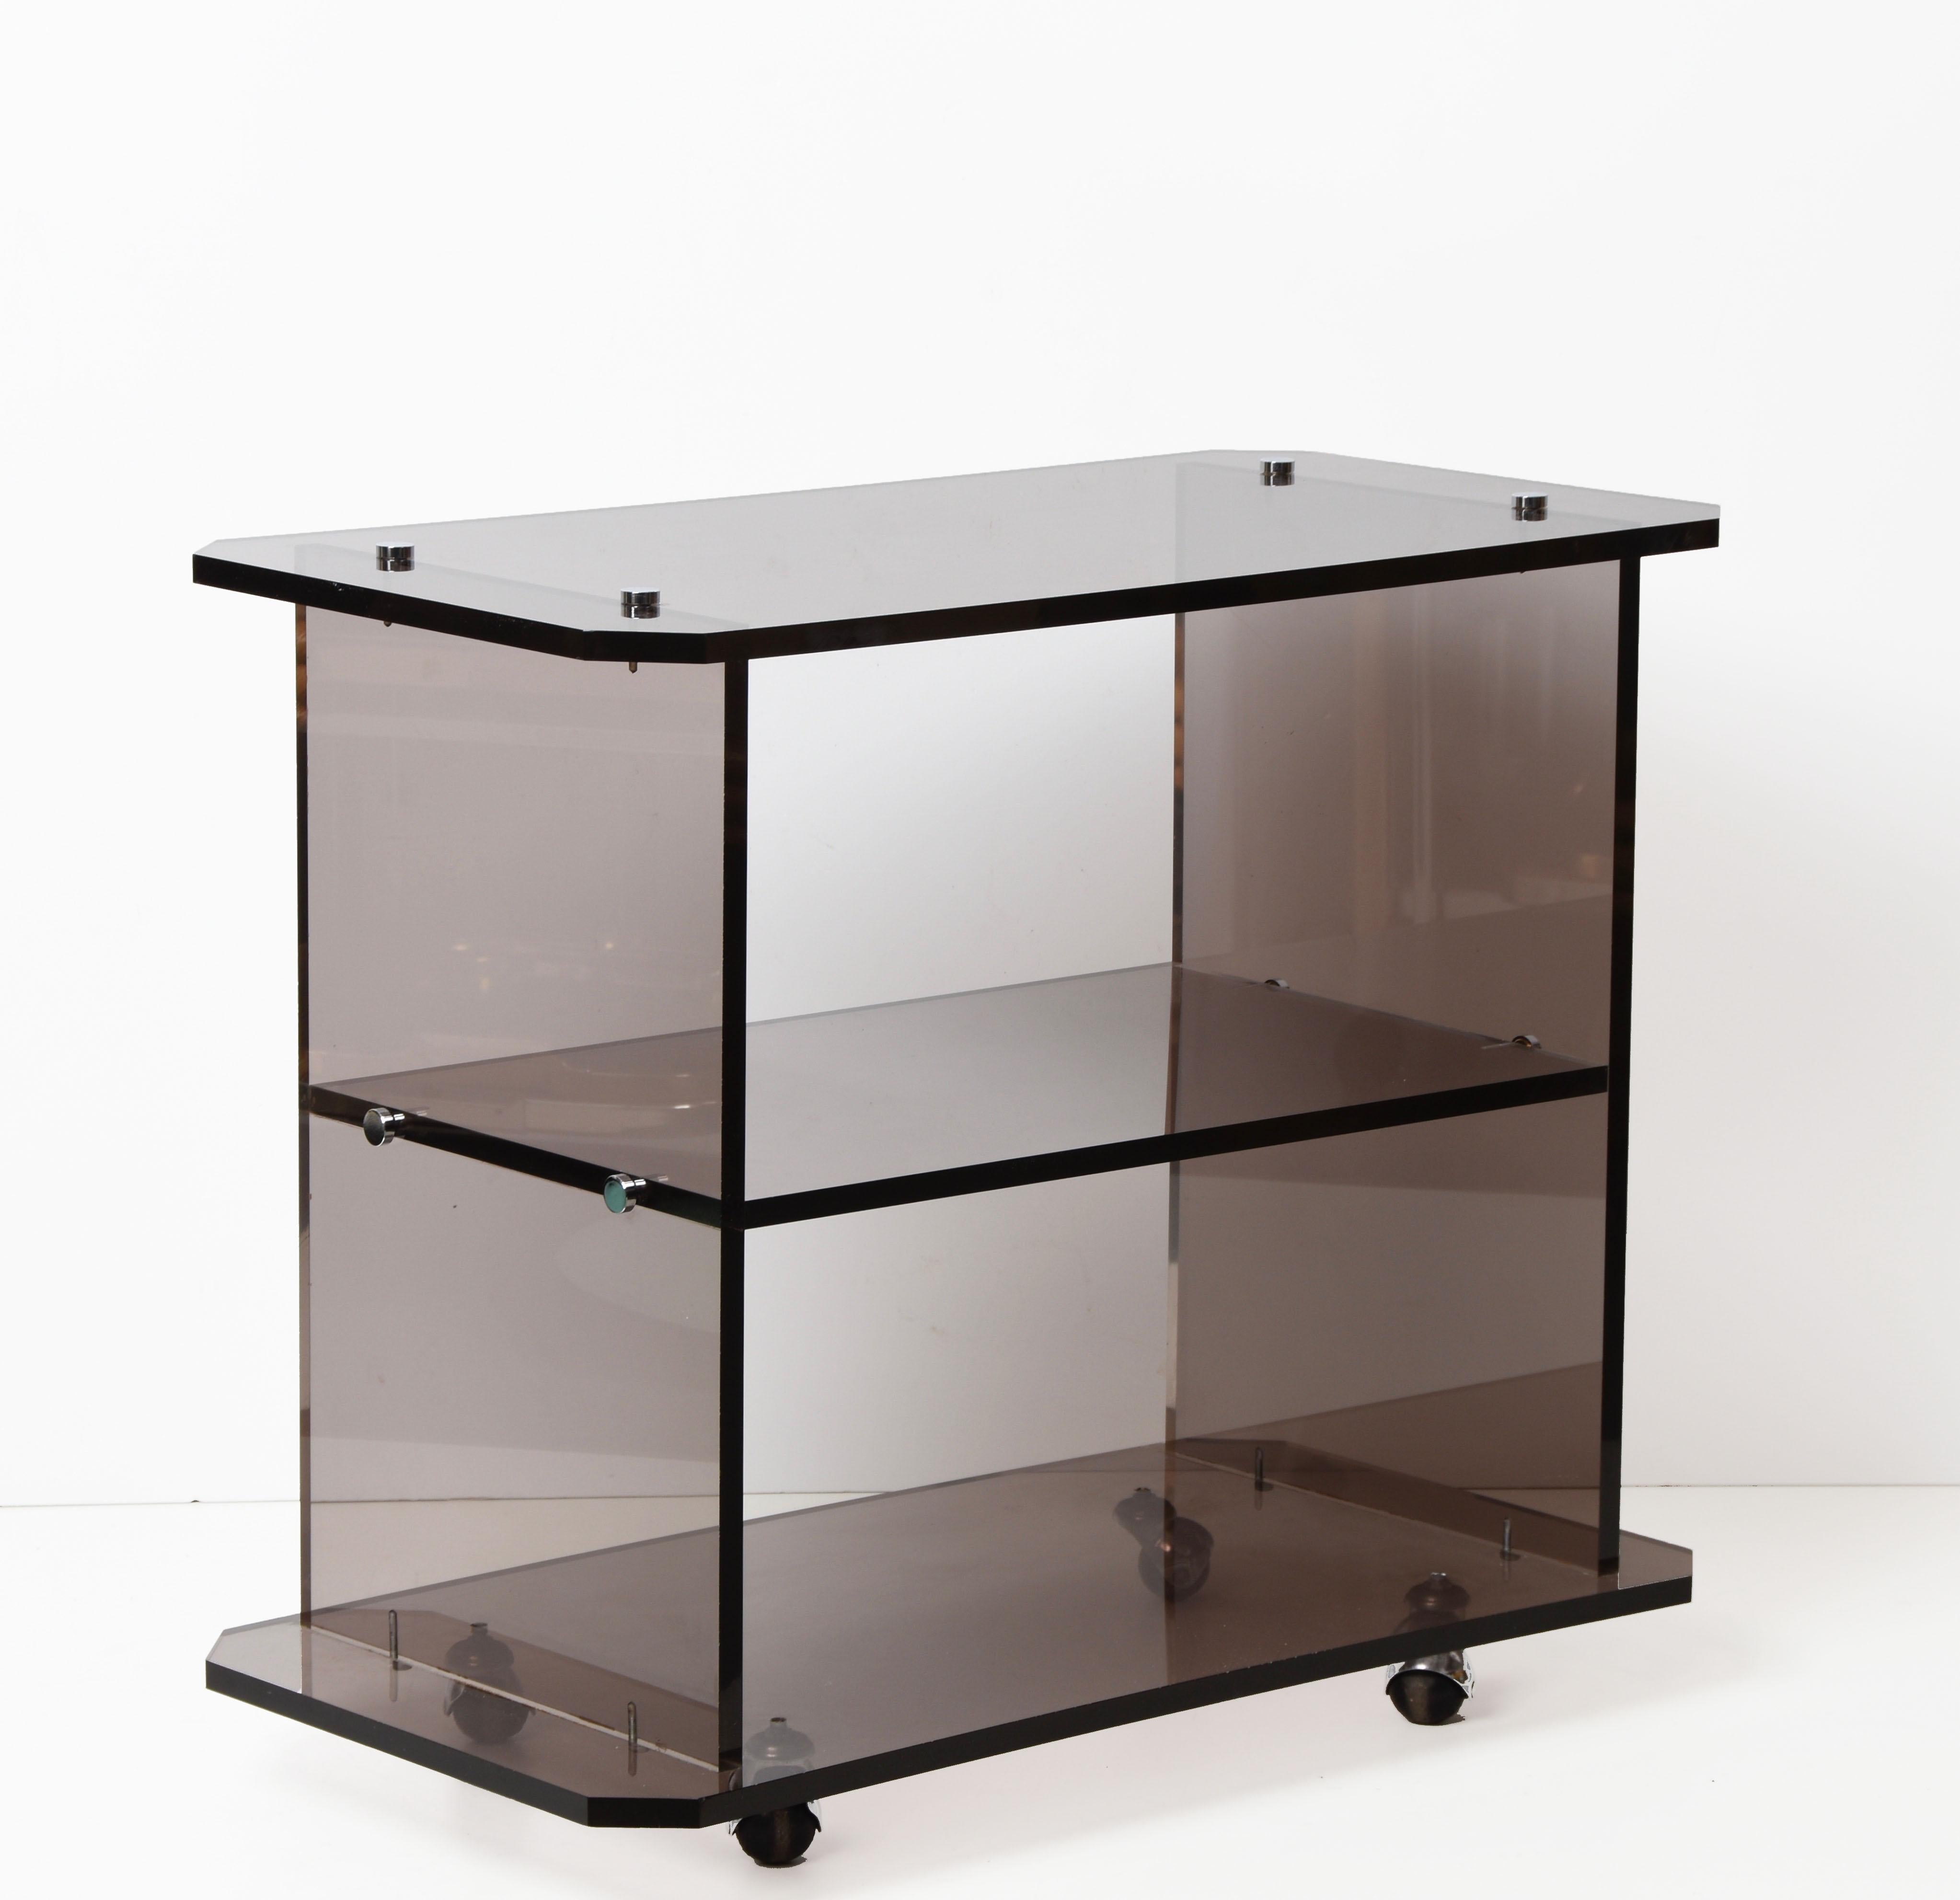 Acrylic Midcentury Italian Smoked Lucite Service Trolley, Willy Rizzo Style, 1980s For Sale